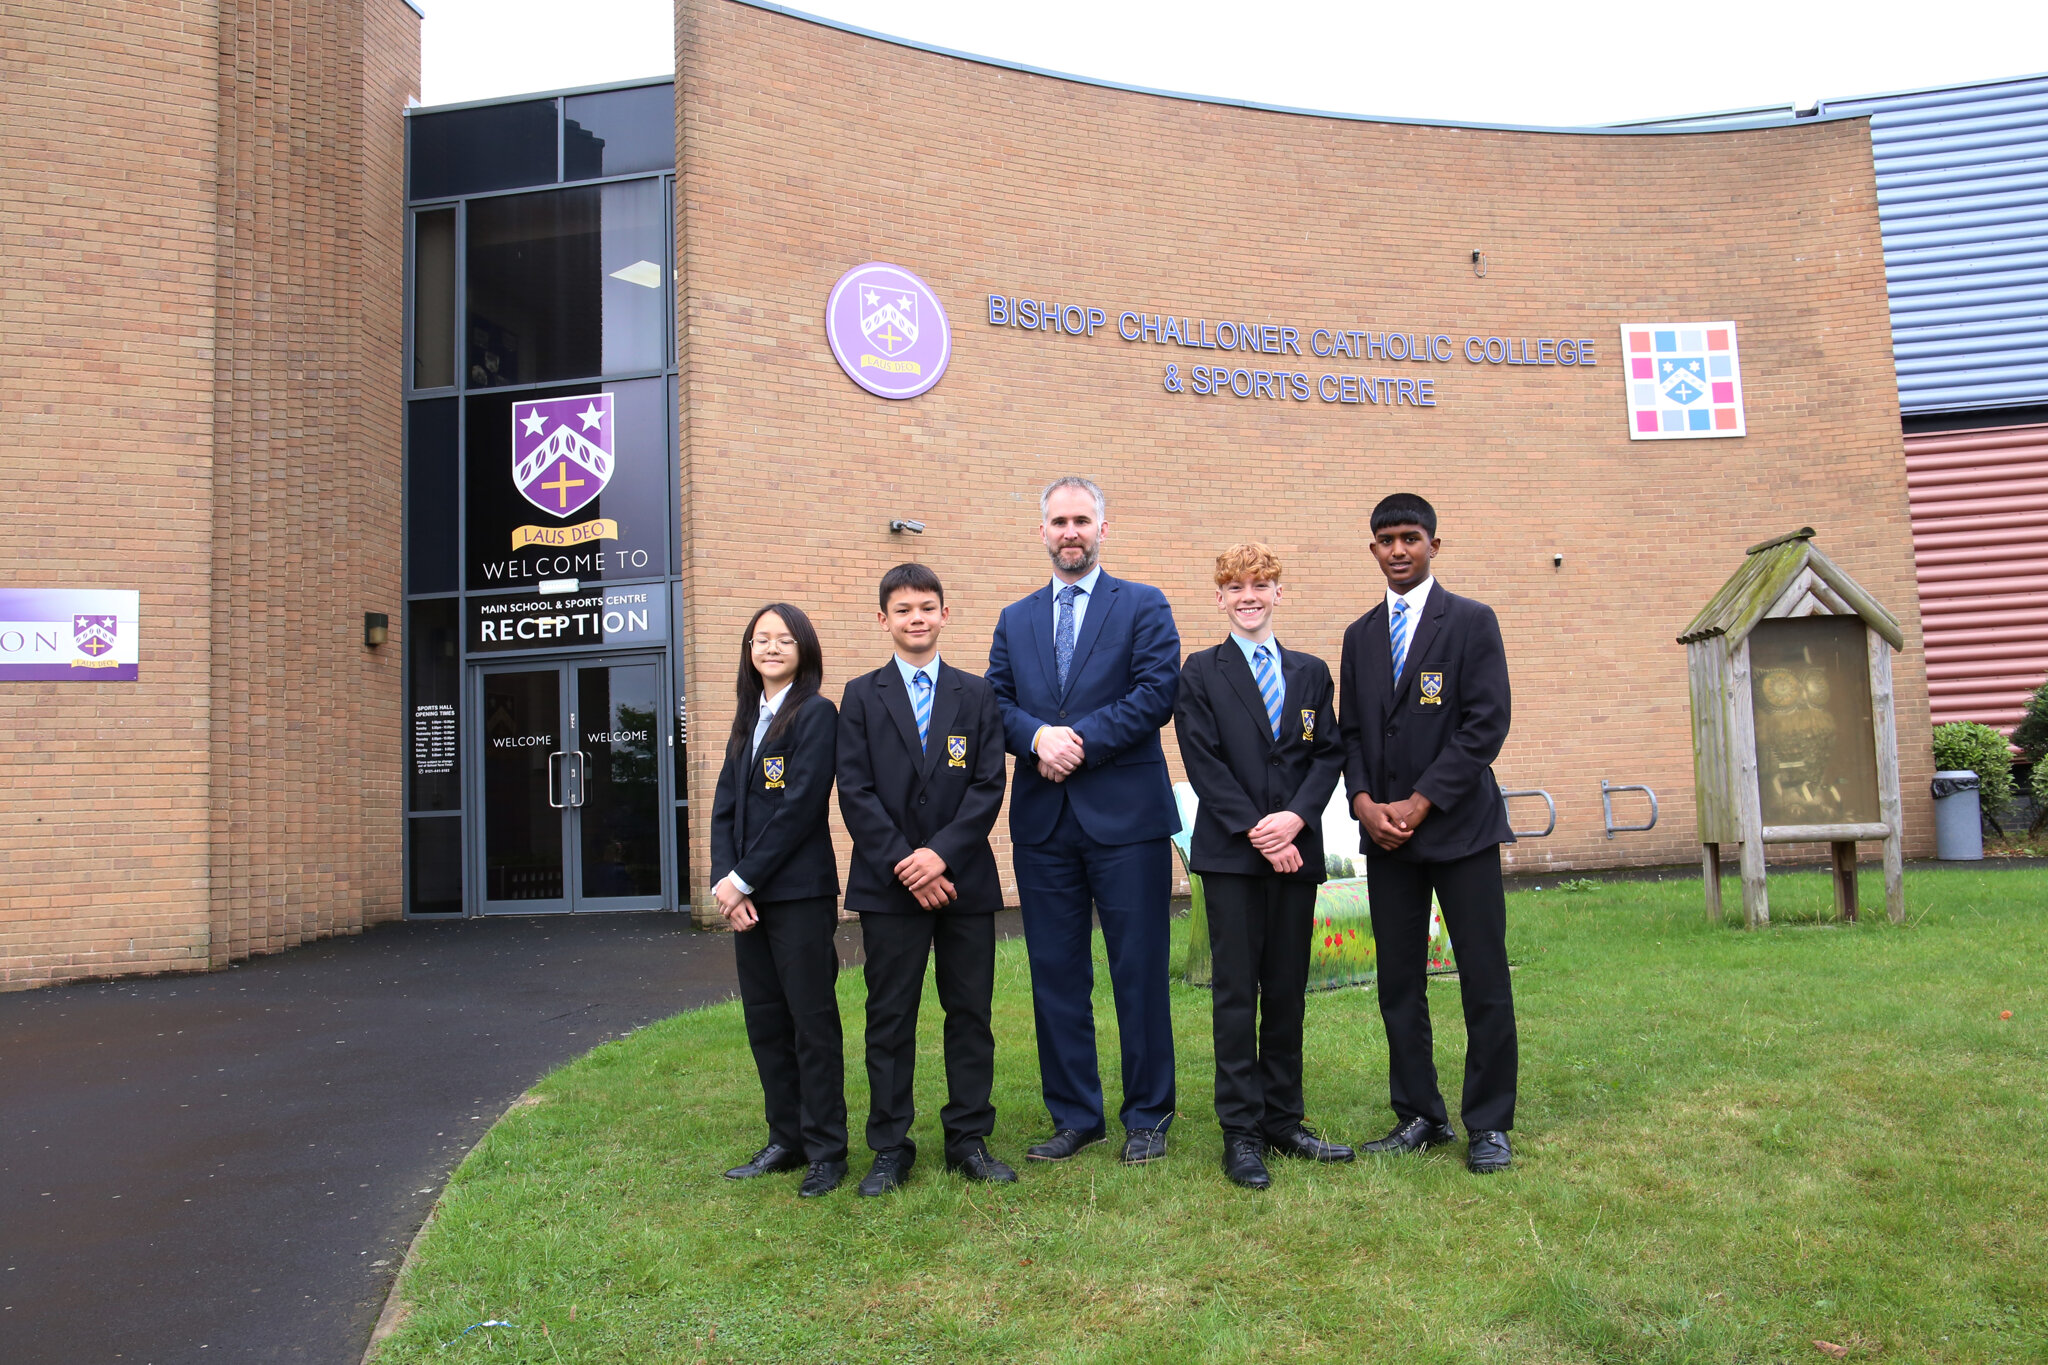 A Warm Welcome Bishop Challoner Catholic College